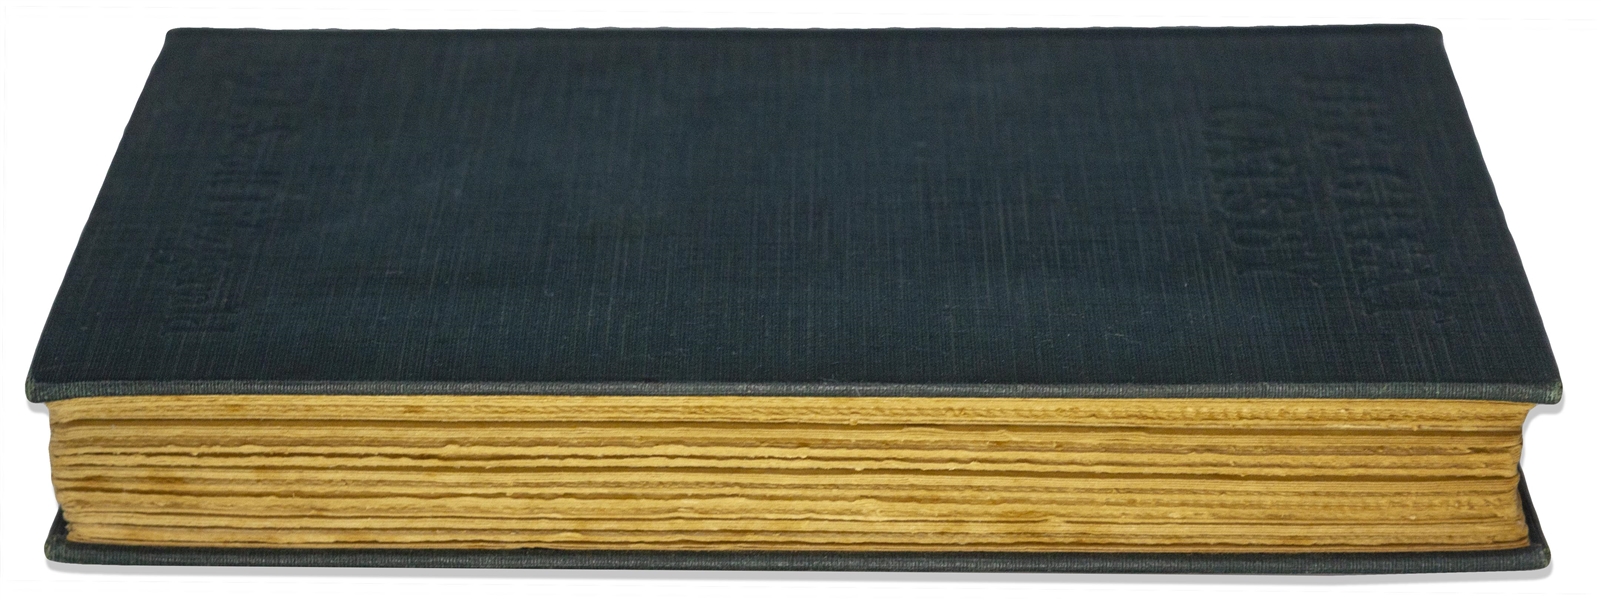 First Edition, First Printing of ''The Great Gatsby'' -- Near Fine Condition